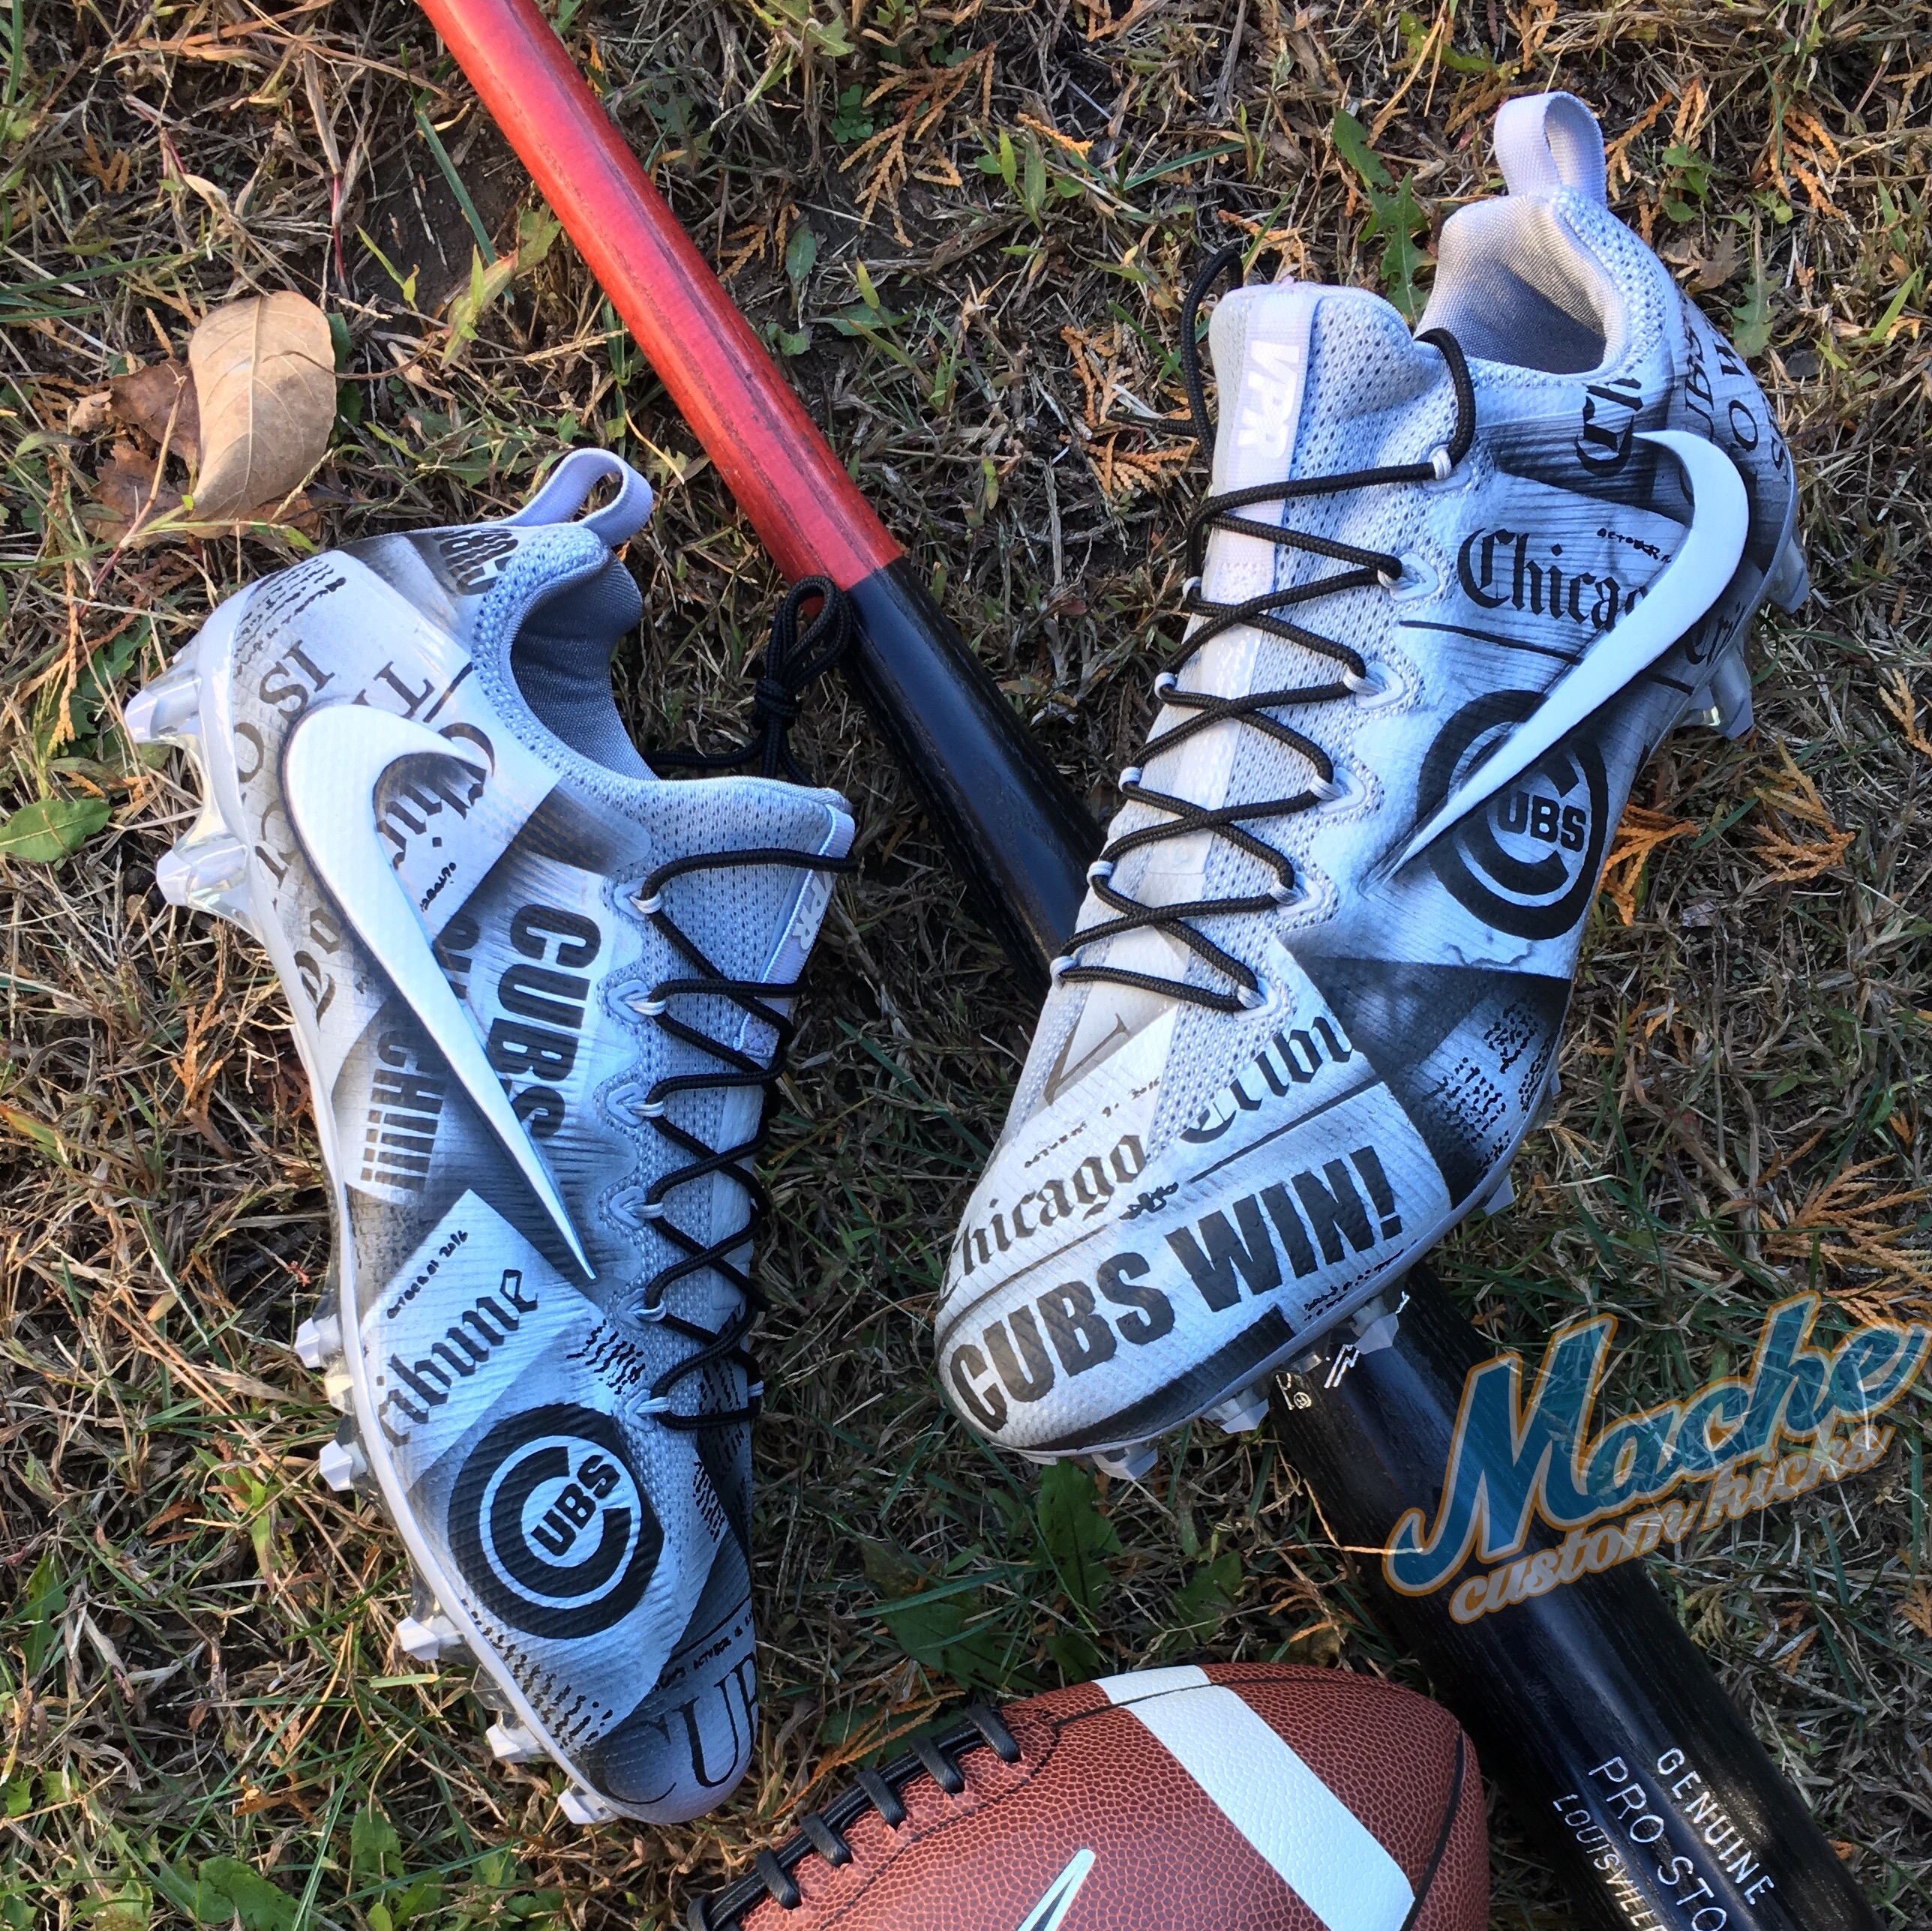 Custom Football Cleats for - Prophetic Airbrush Designs